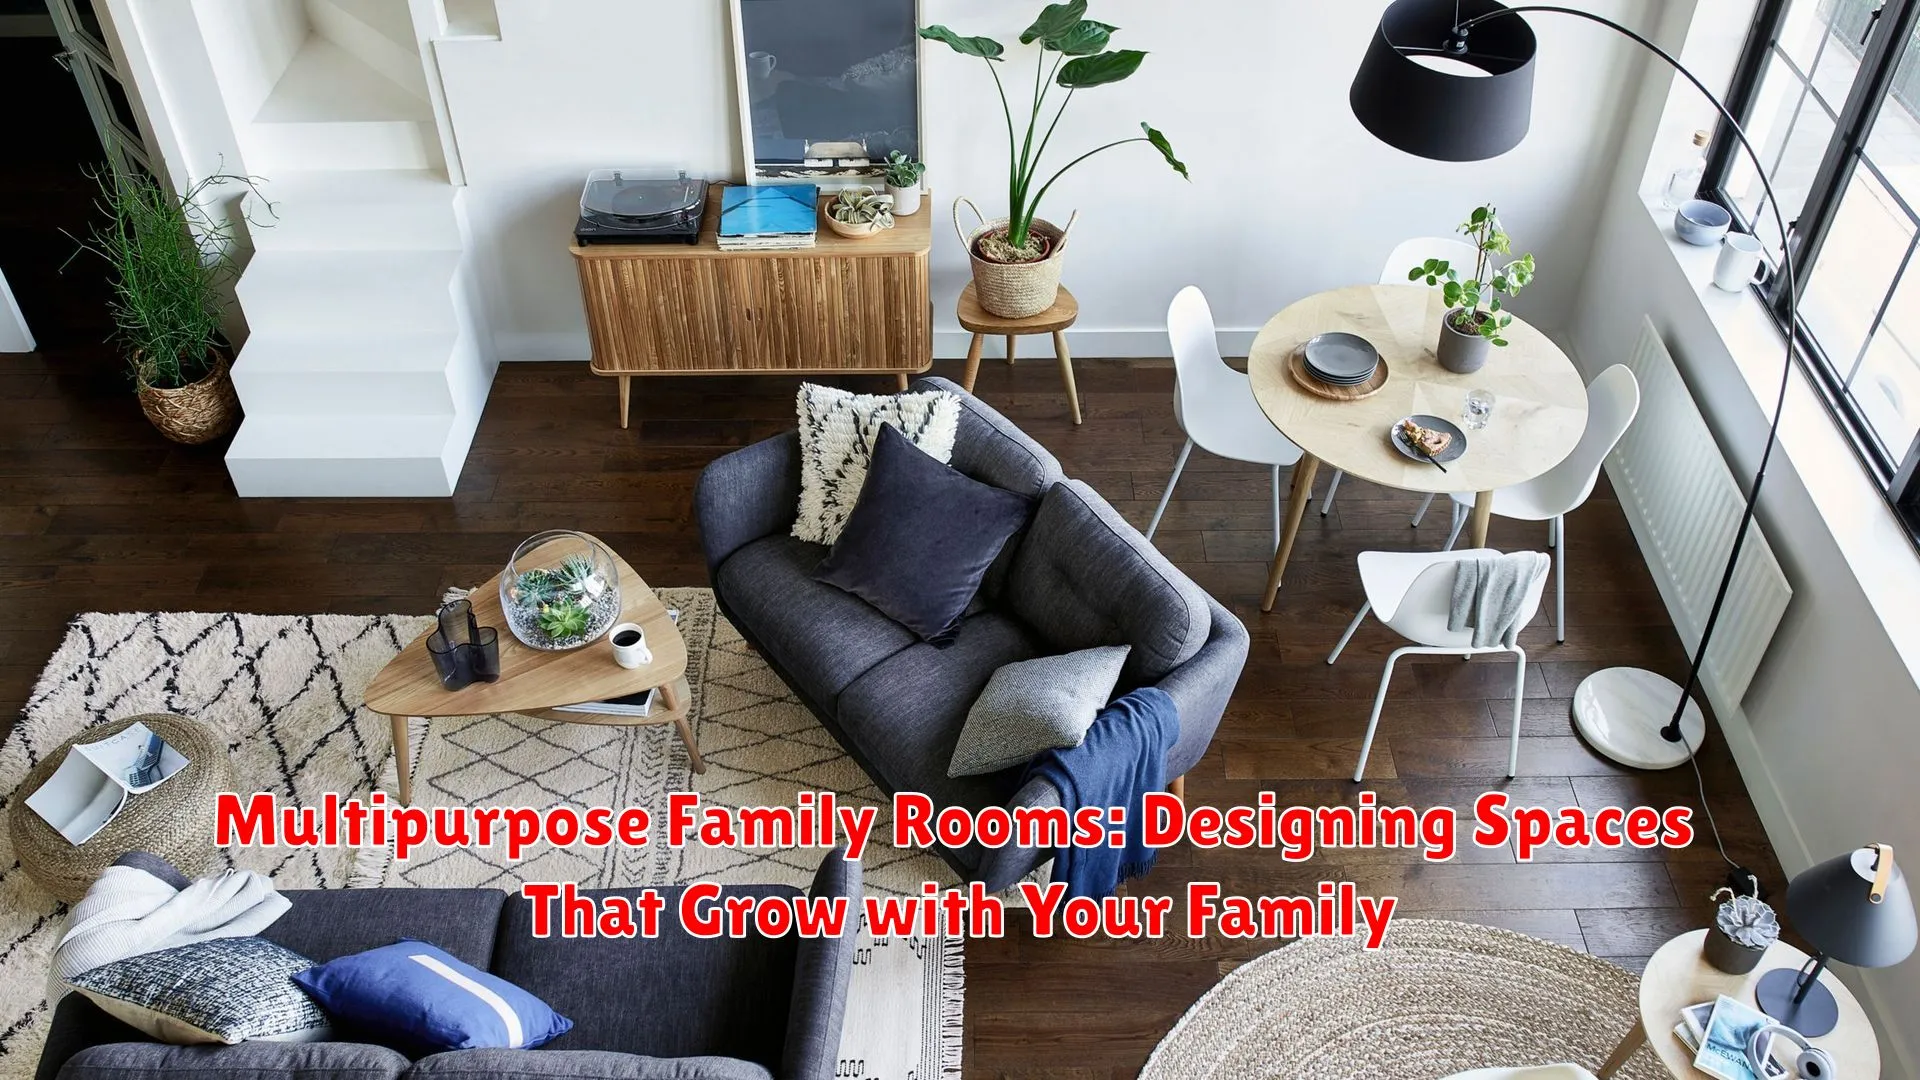 Multipurpose Family Rooms: Designing Spaces That Grow with Your Family